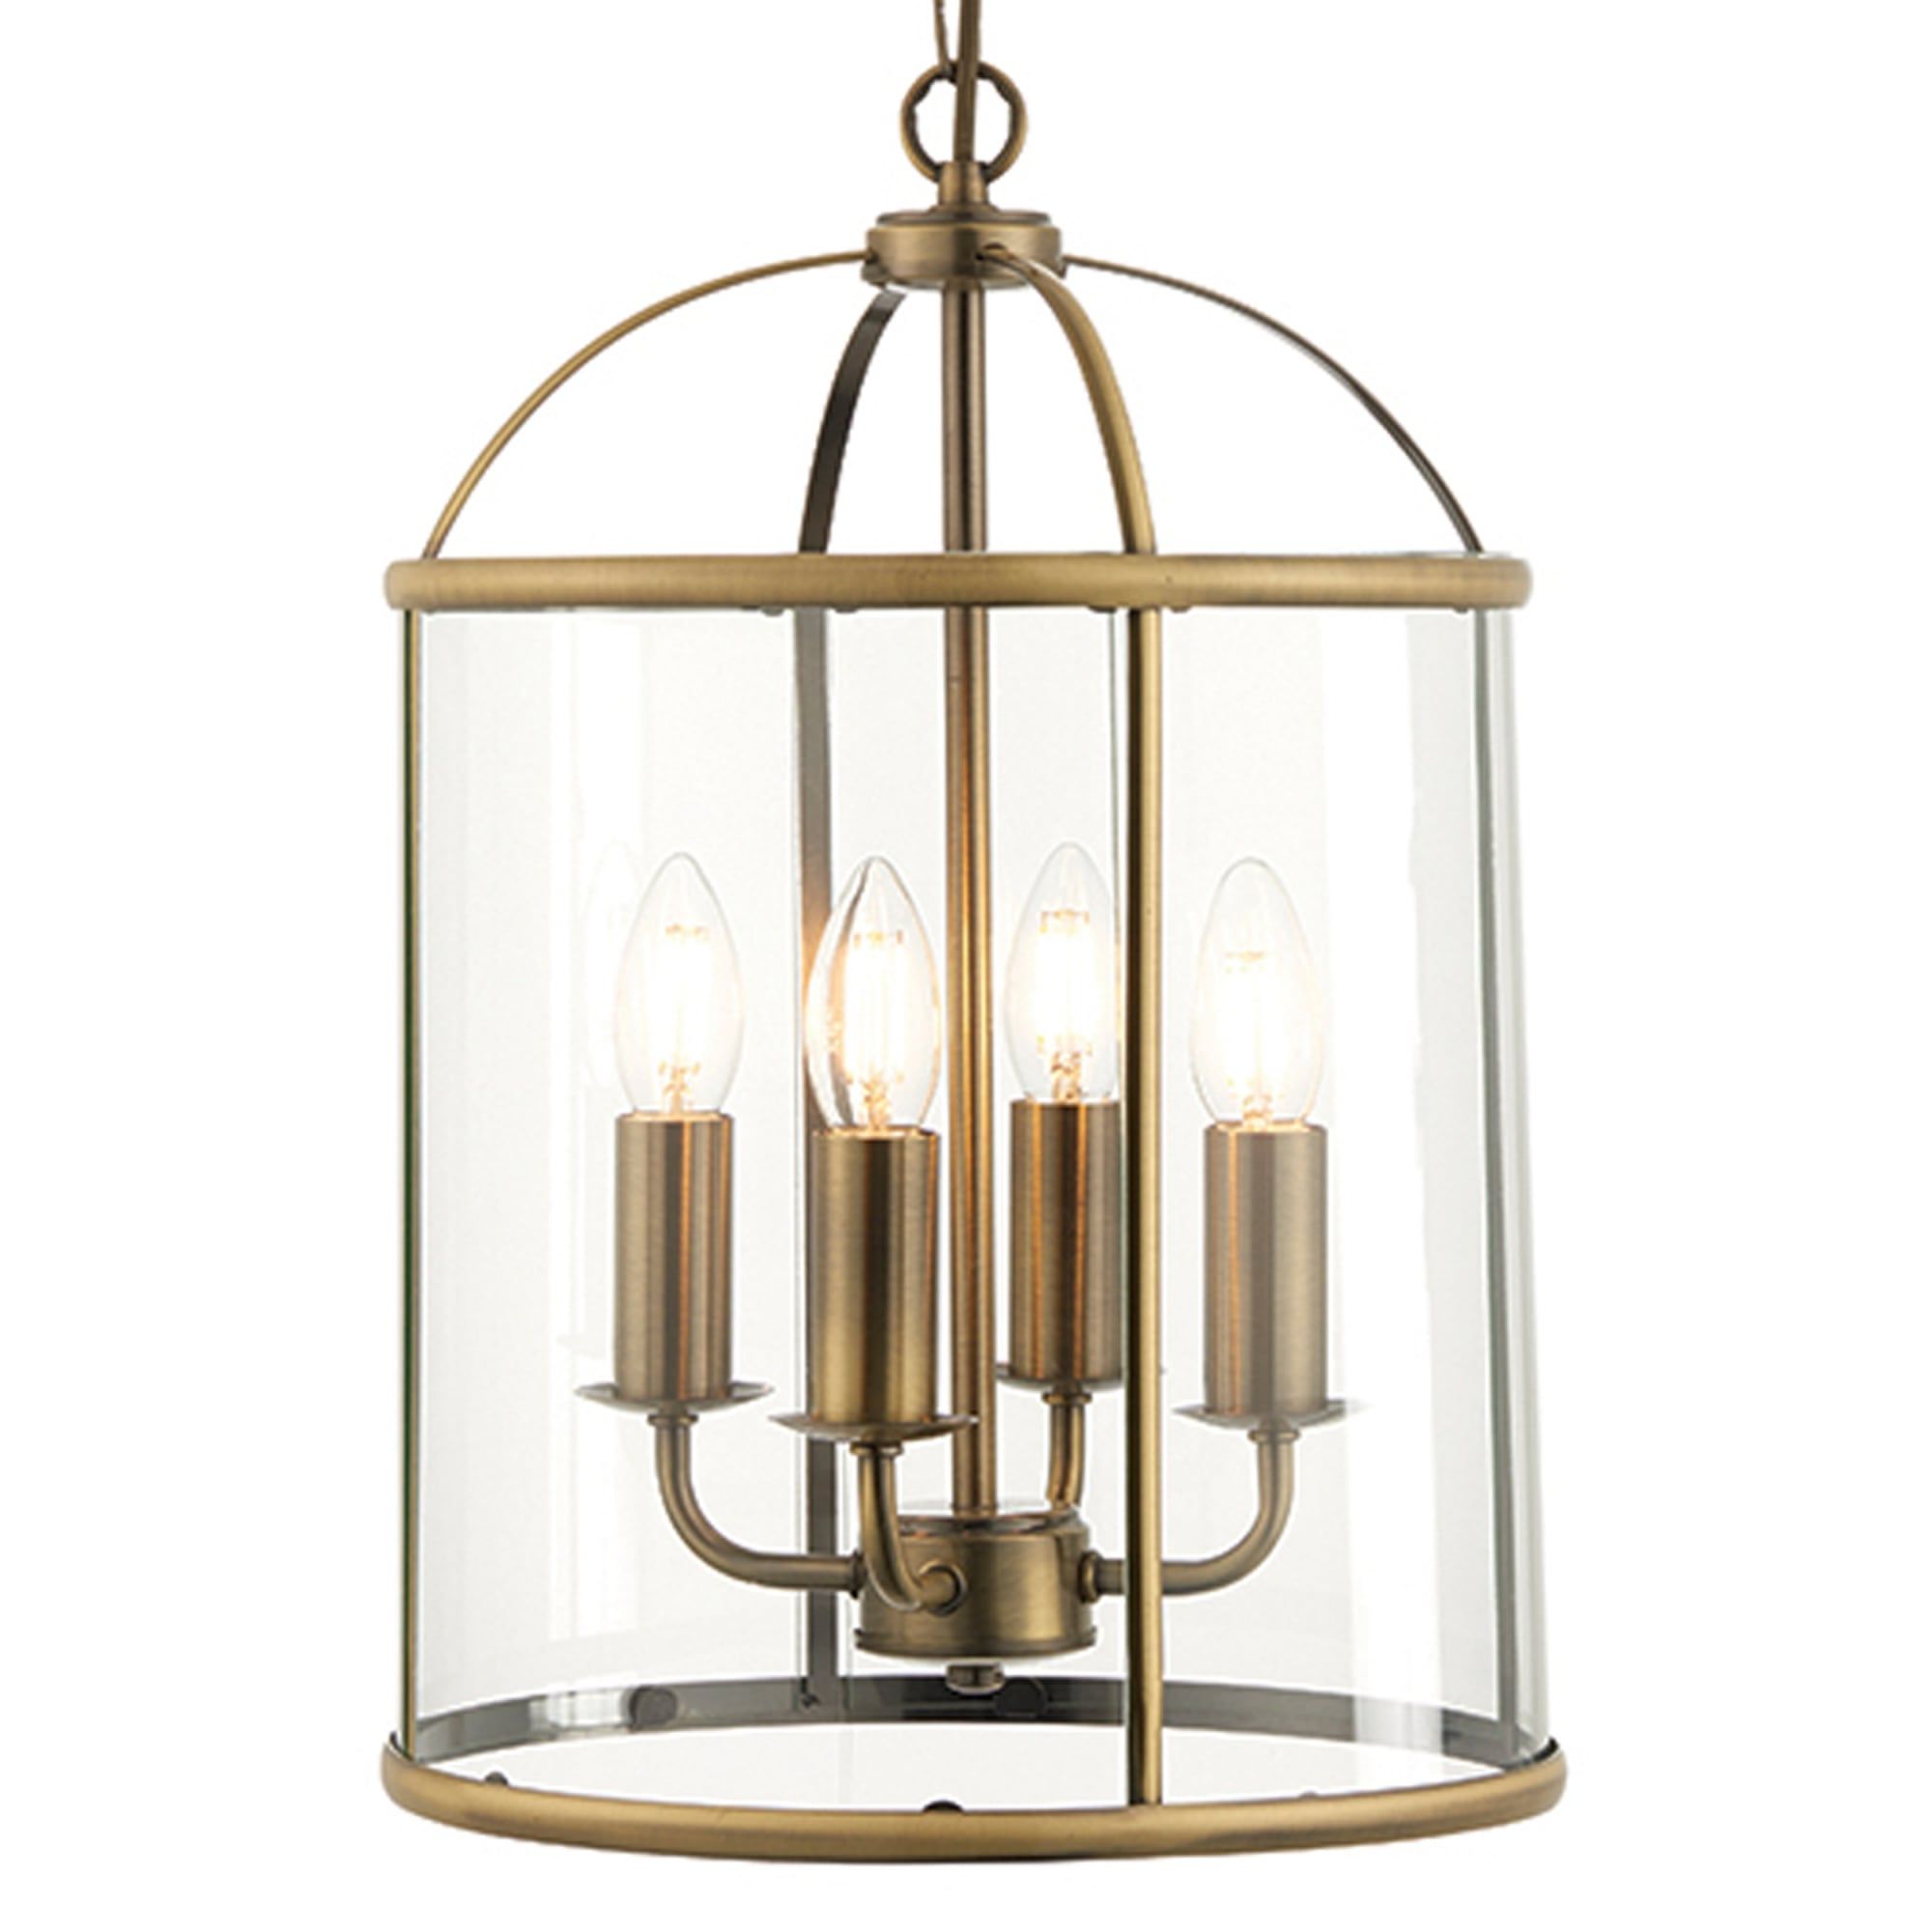 Trendy Aged Brass Lantern Chandeliers With Endon 69455 Lambeth 4 Light Antique Brass And Glass Lantern Pendant (View 9 of 15)